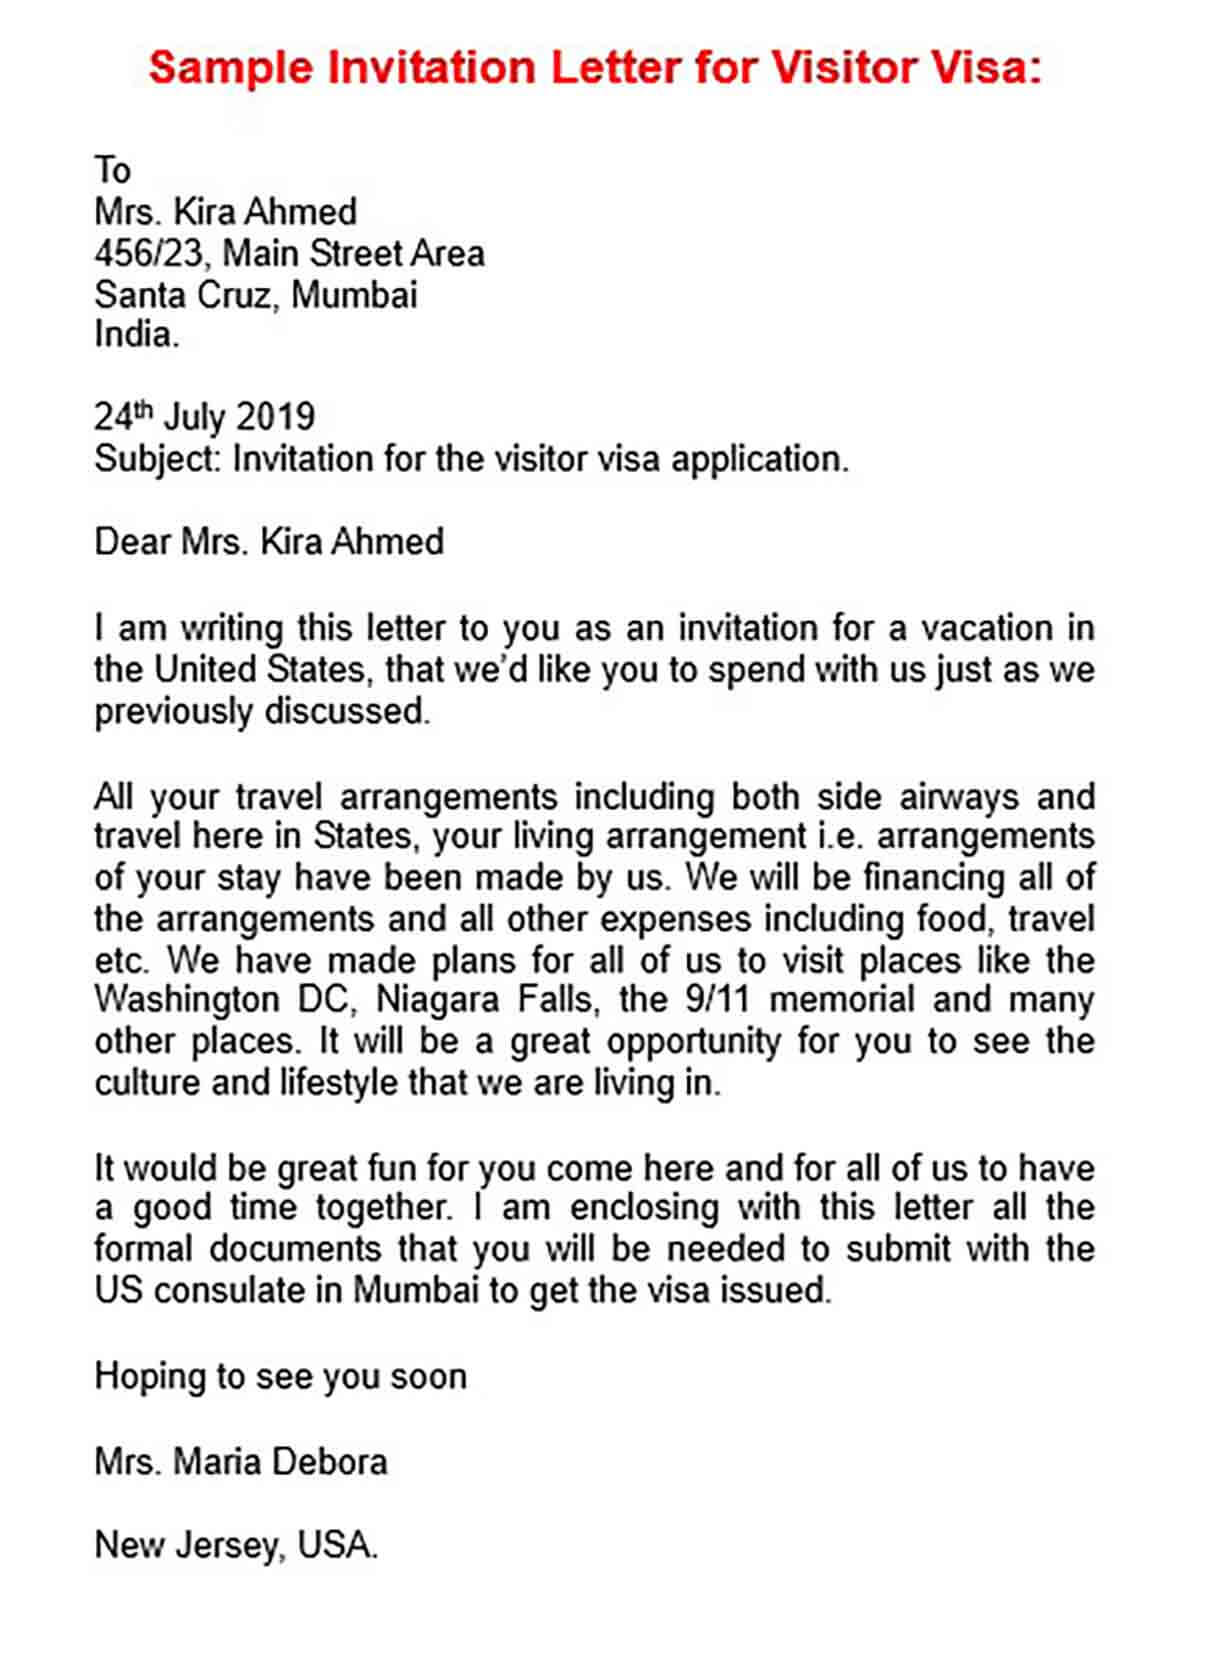 Inviting Letter For Us Visa from moussyusa.com